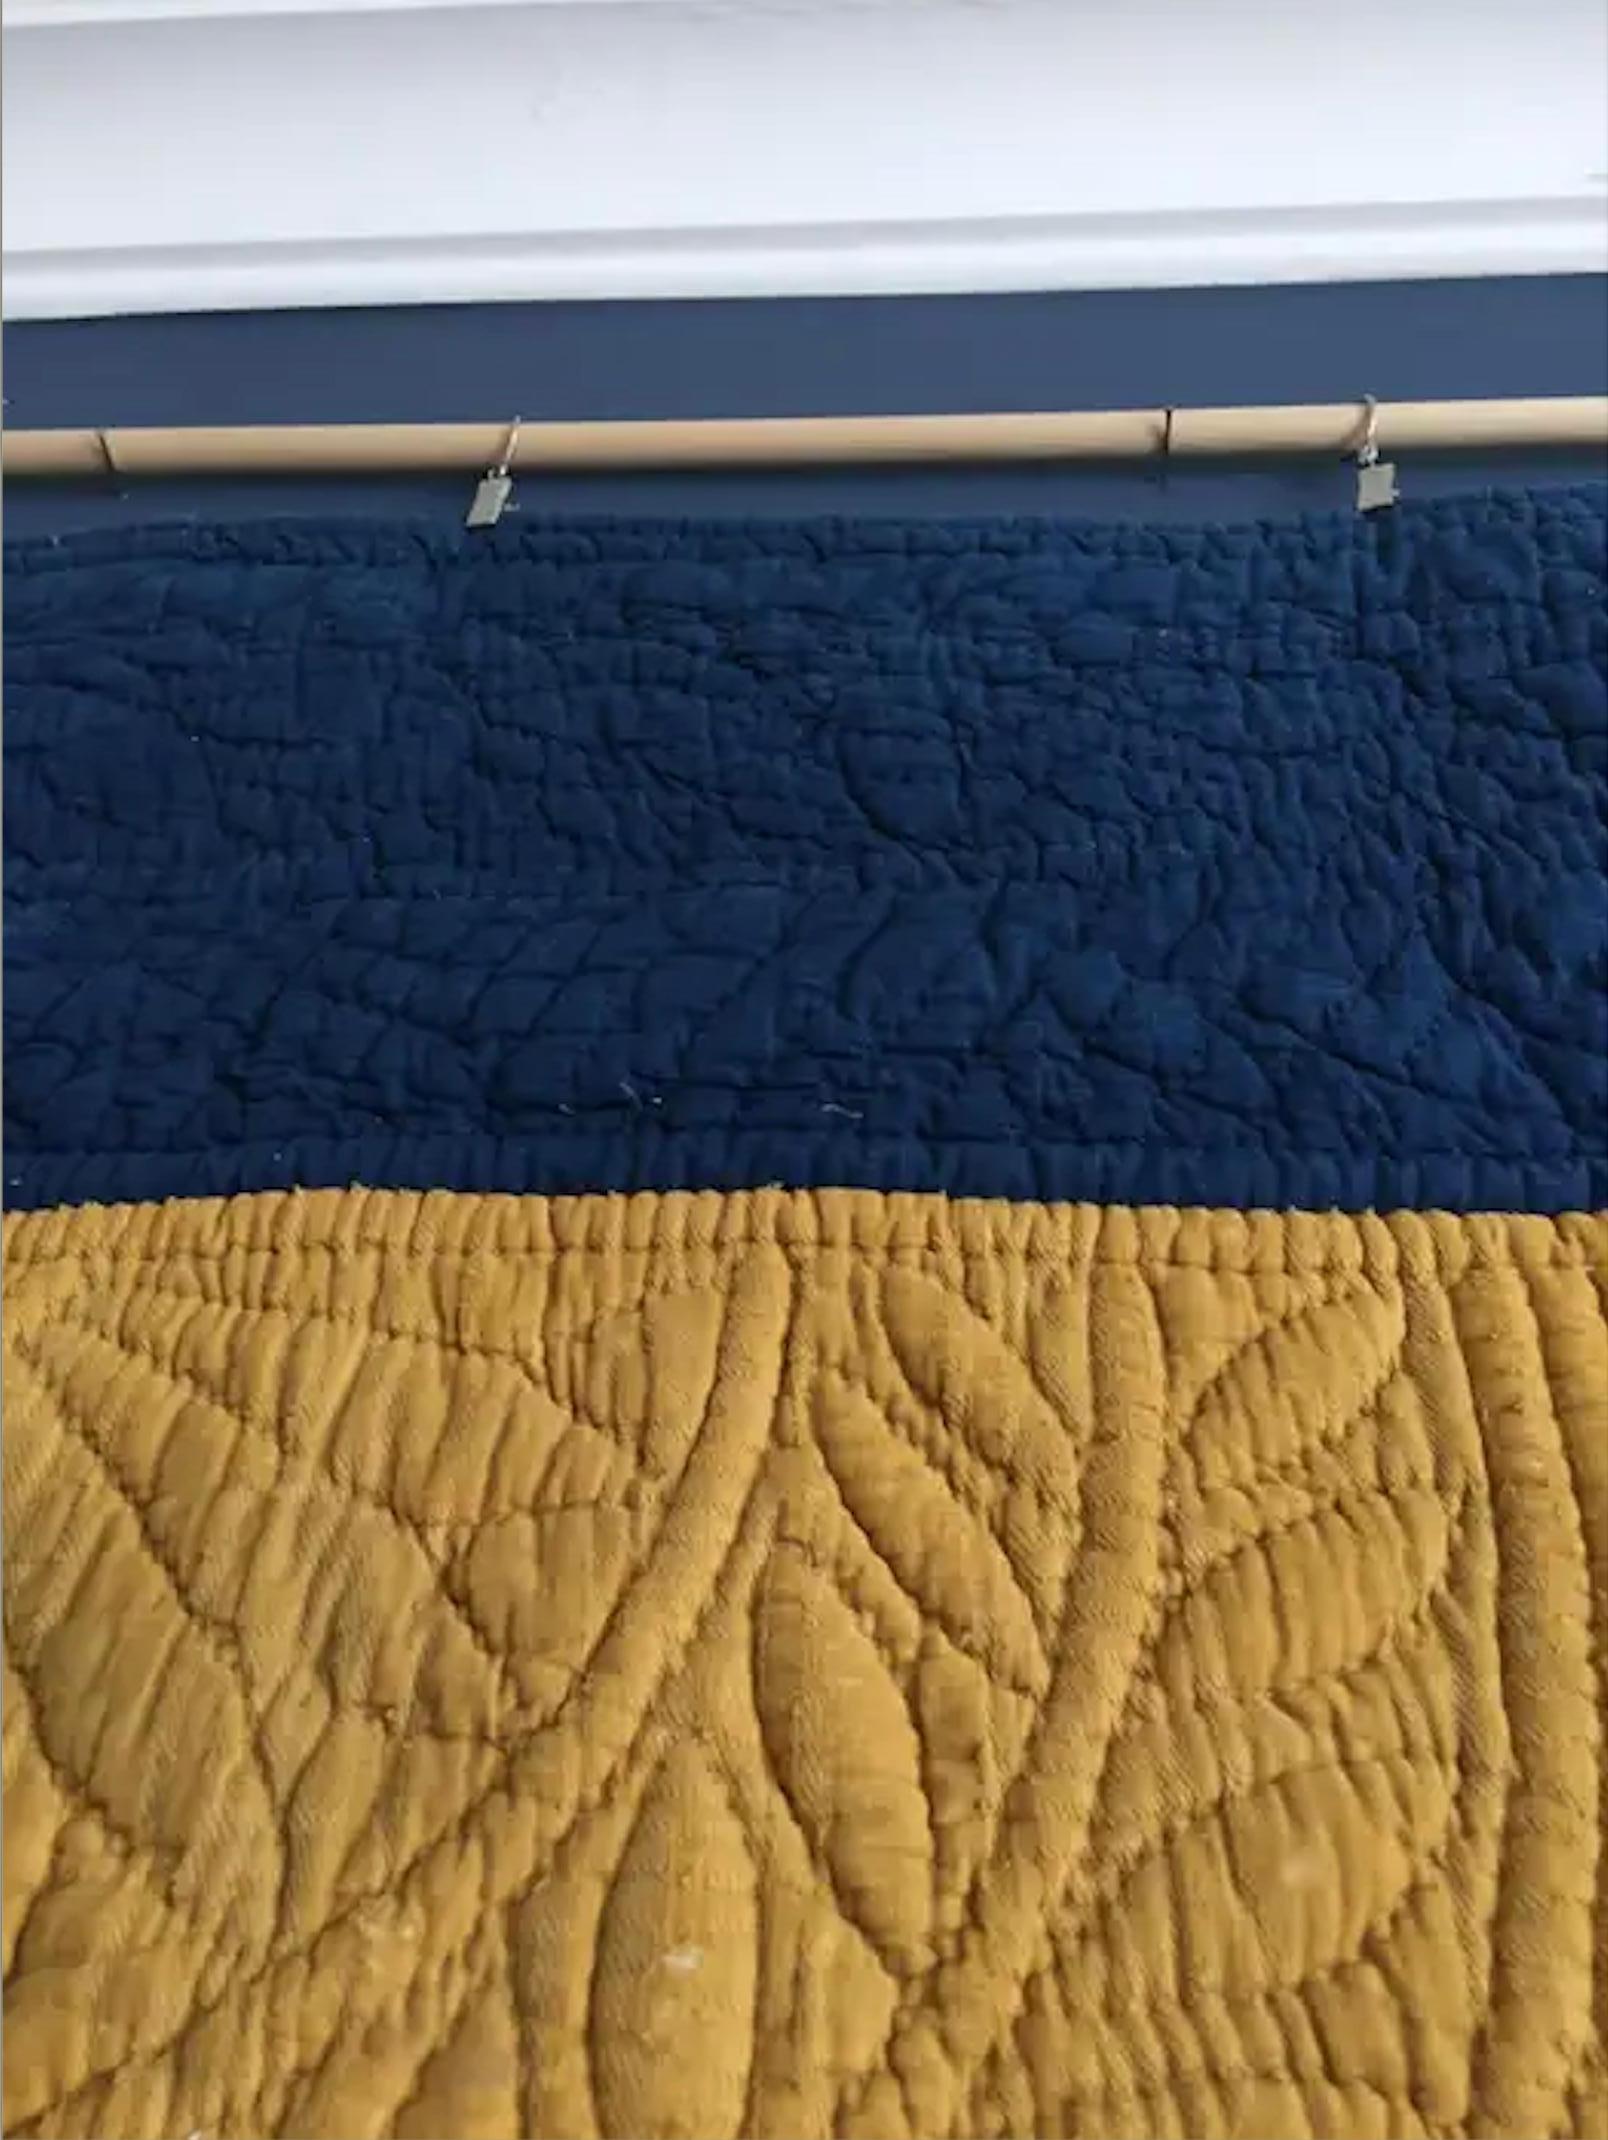 Hand-Crafted Vintage Cotton Quilt in Indigo and Saffron Yellow, French, Early 19th Century